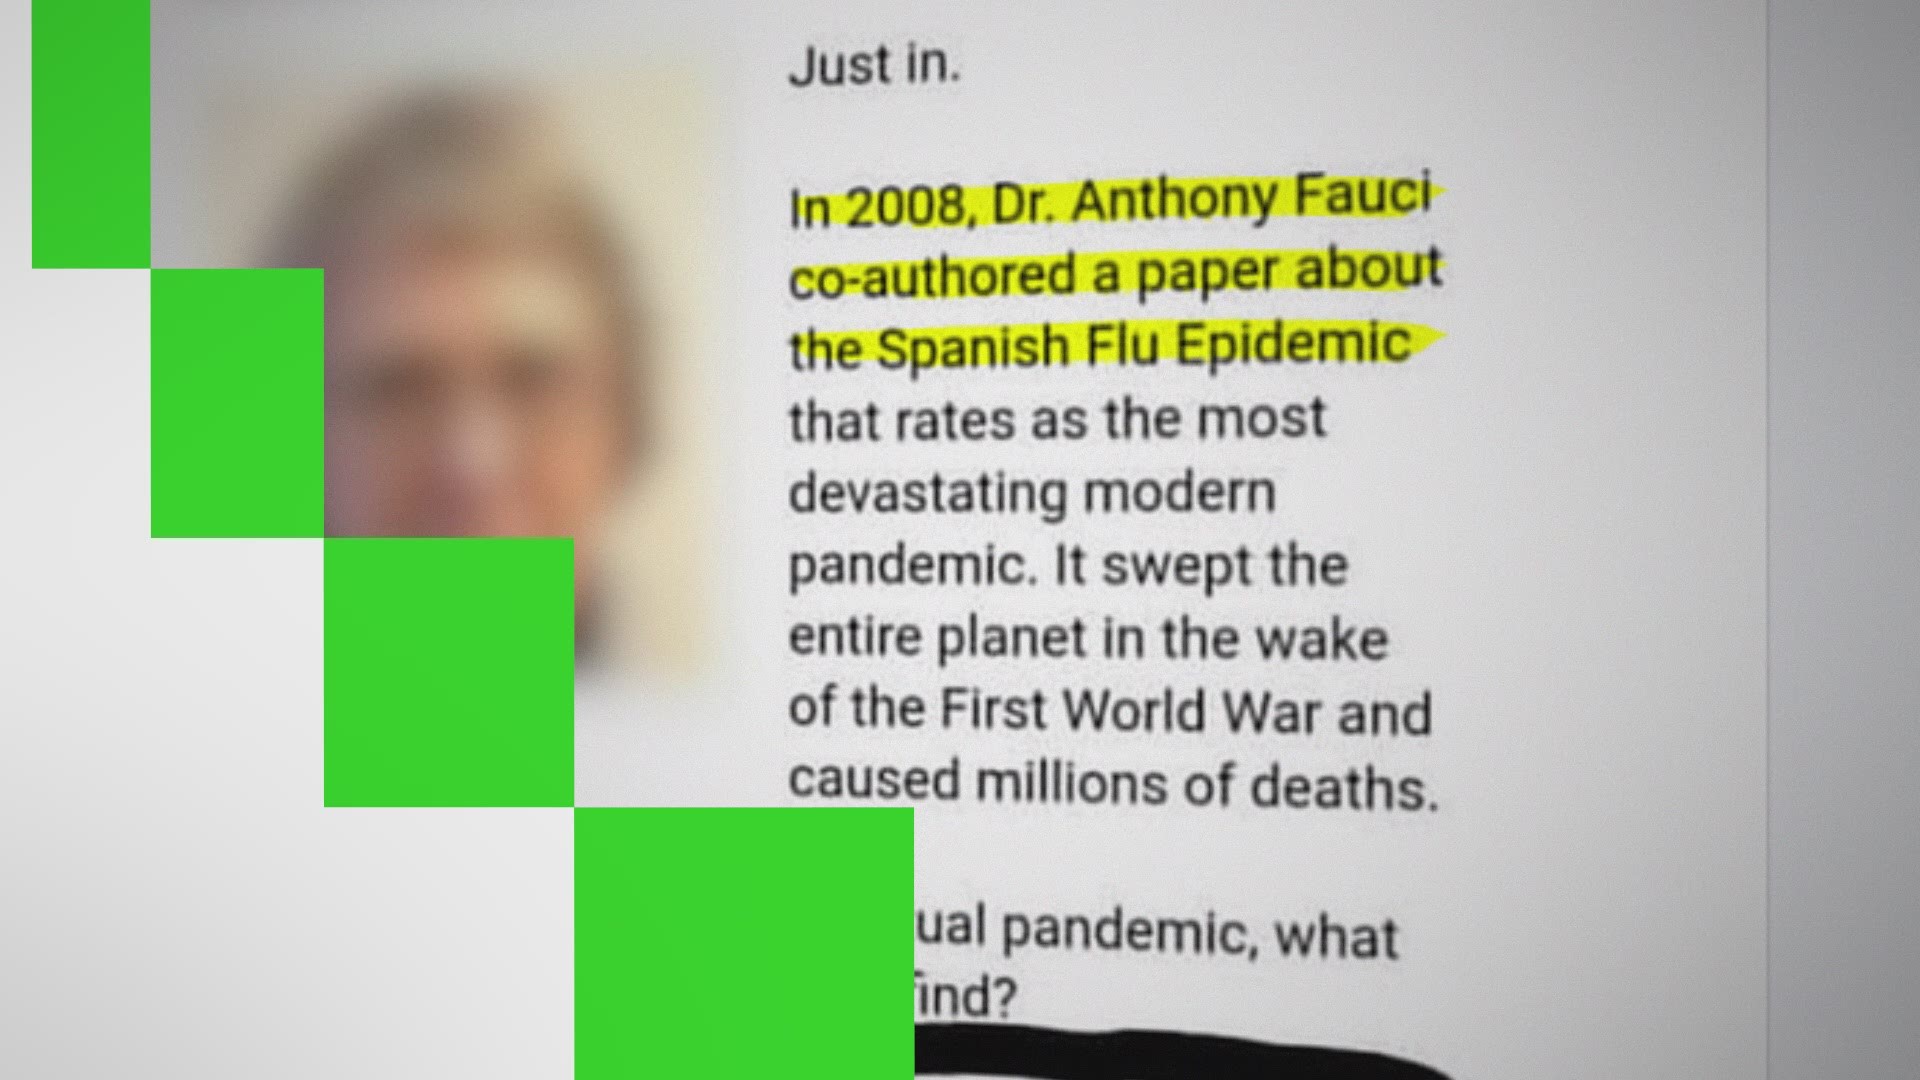 A viral claim says that Dr. Anthony Fauci published a study in 2008 that linked bacterial pneumonia in the 1918 flu outbreak to people wearing masks. That's false.